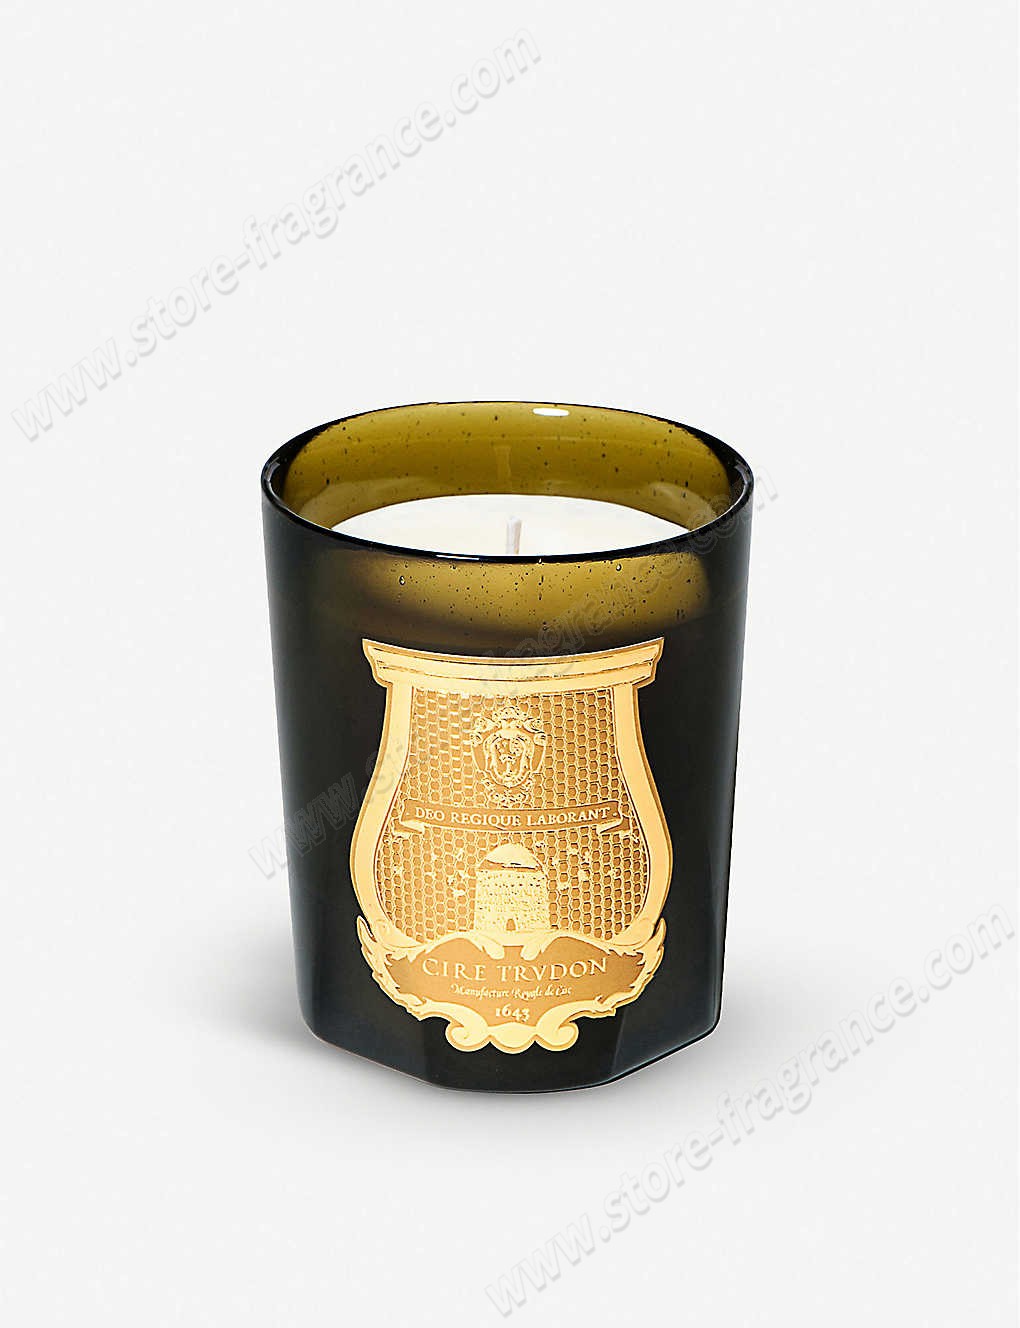 CIRE TRUDON/Dada scented candle 270g ✿ Discount Store - CIRE TRUDON/Dada scented candle 270g ✿ Discount Store